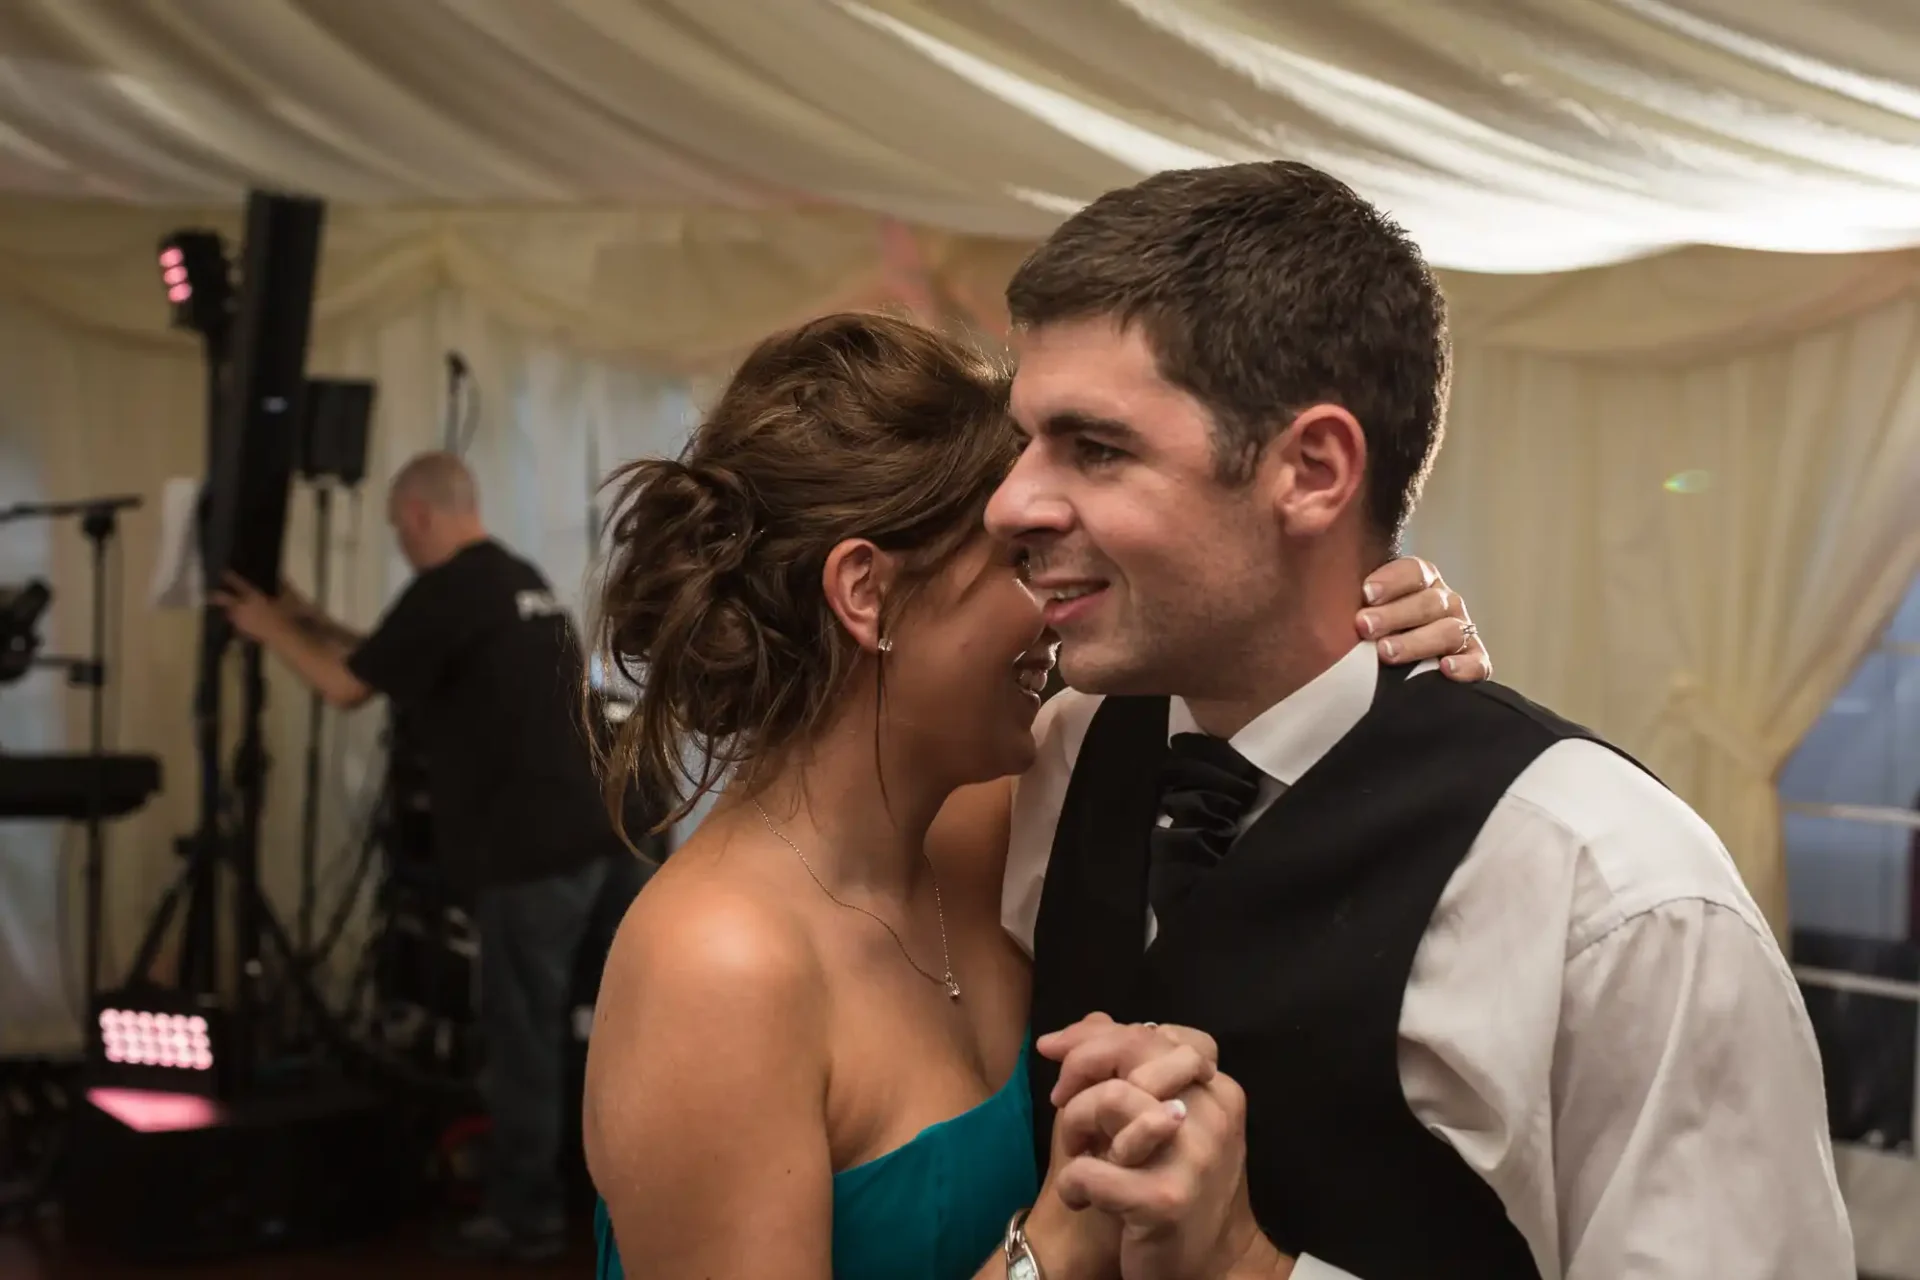 A couple dancing closely at a wedding reception with a dj performing in the background under a tent.